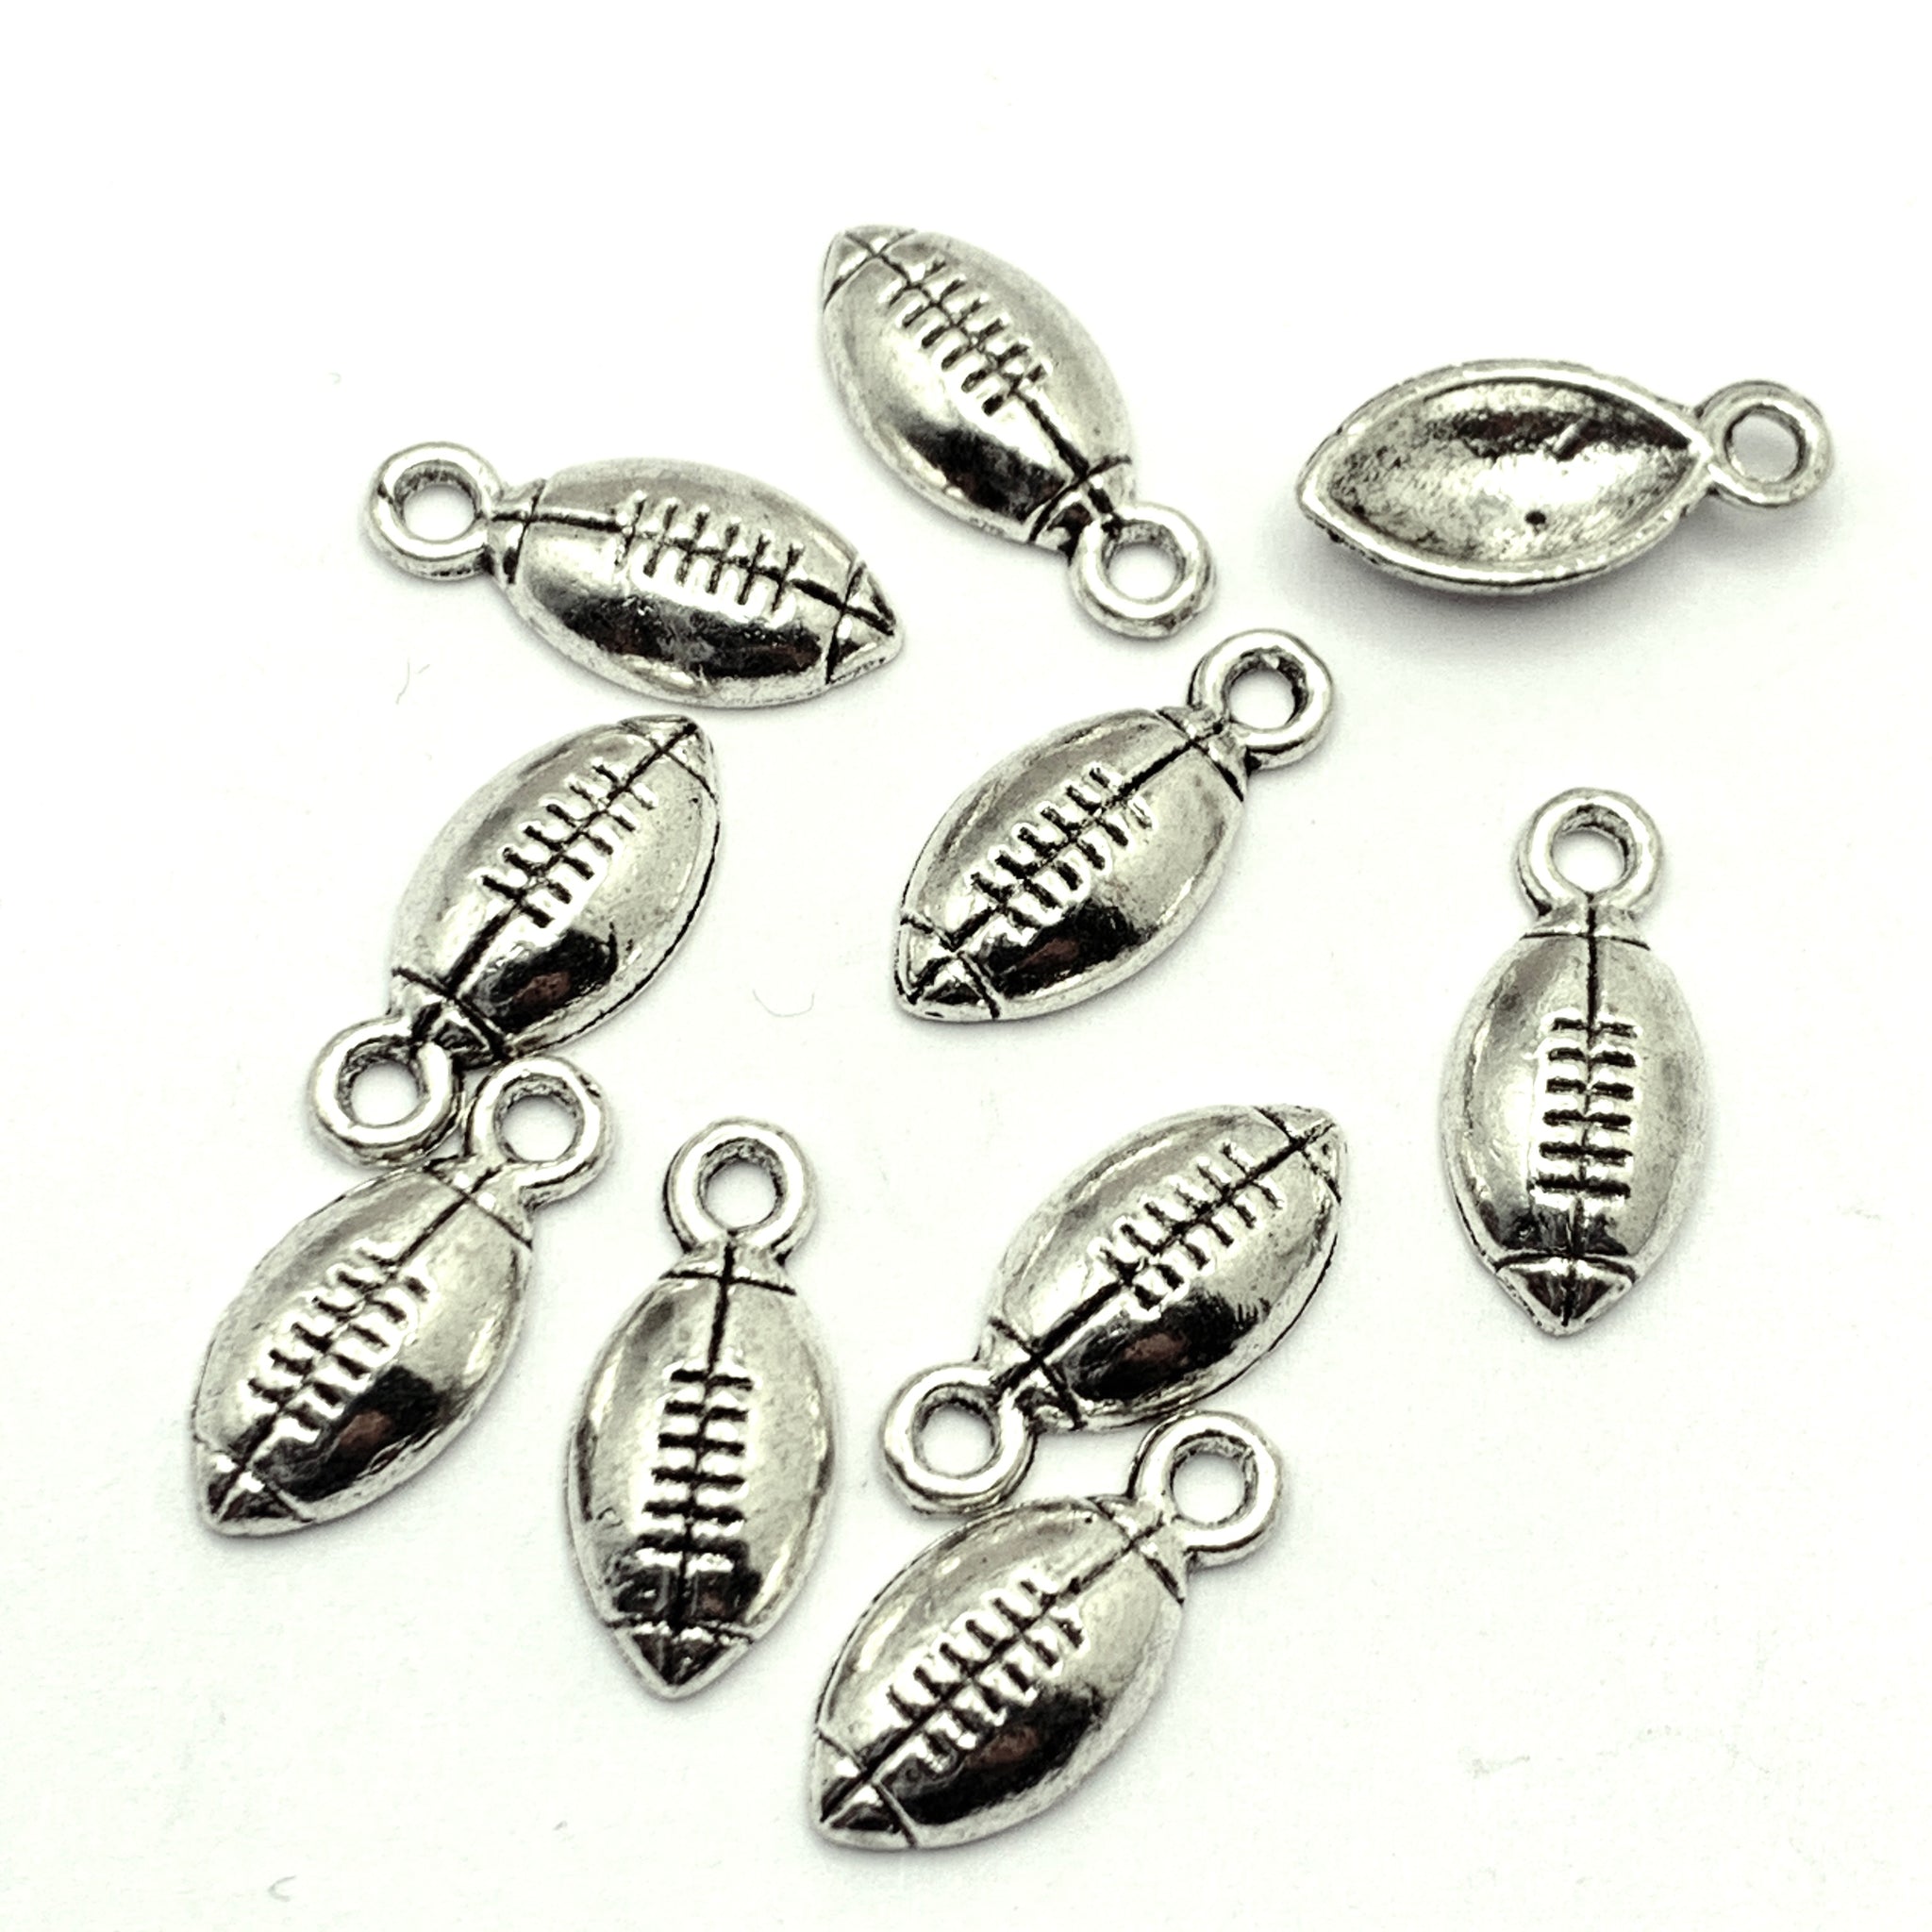 Football Antique Silver Plated Jewelry Pendant Charms, 15mm - 10